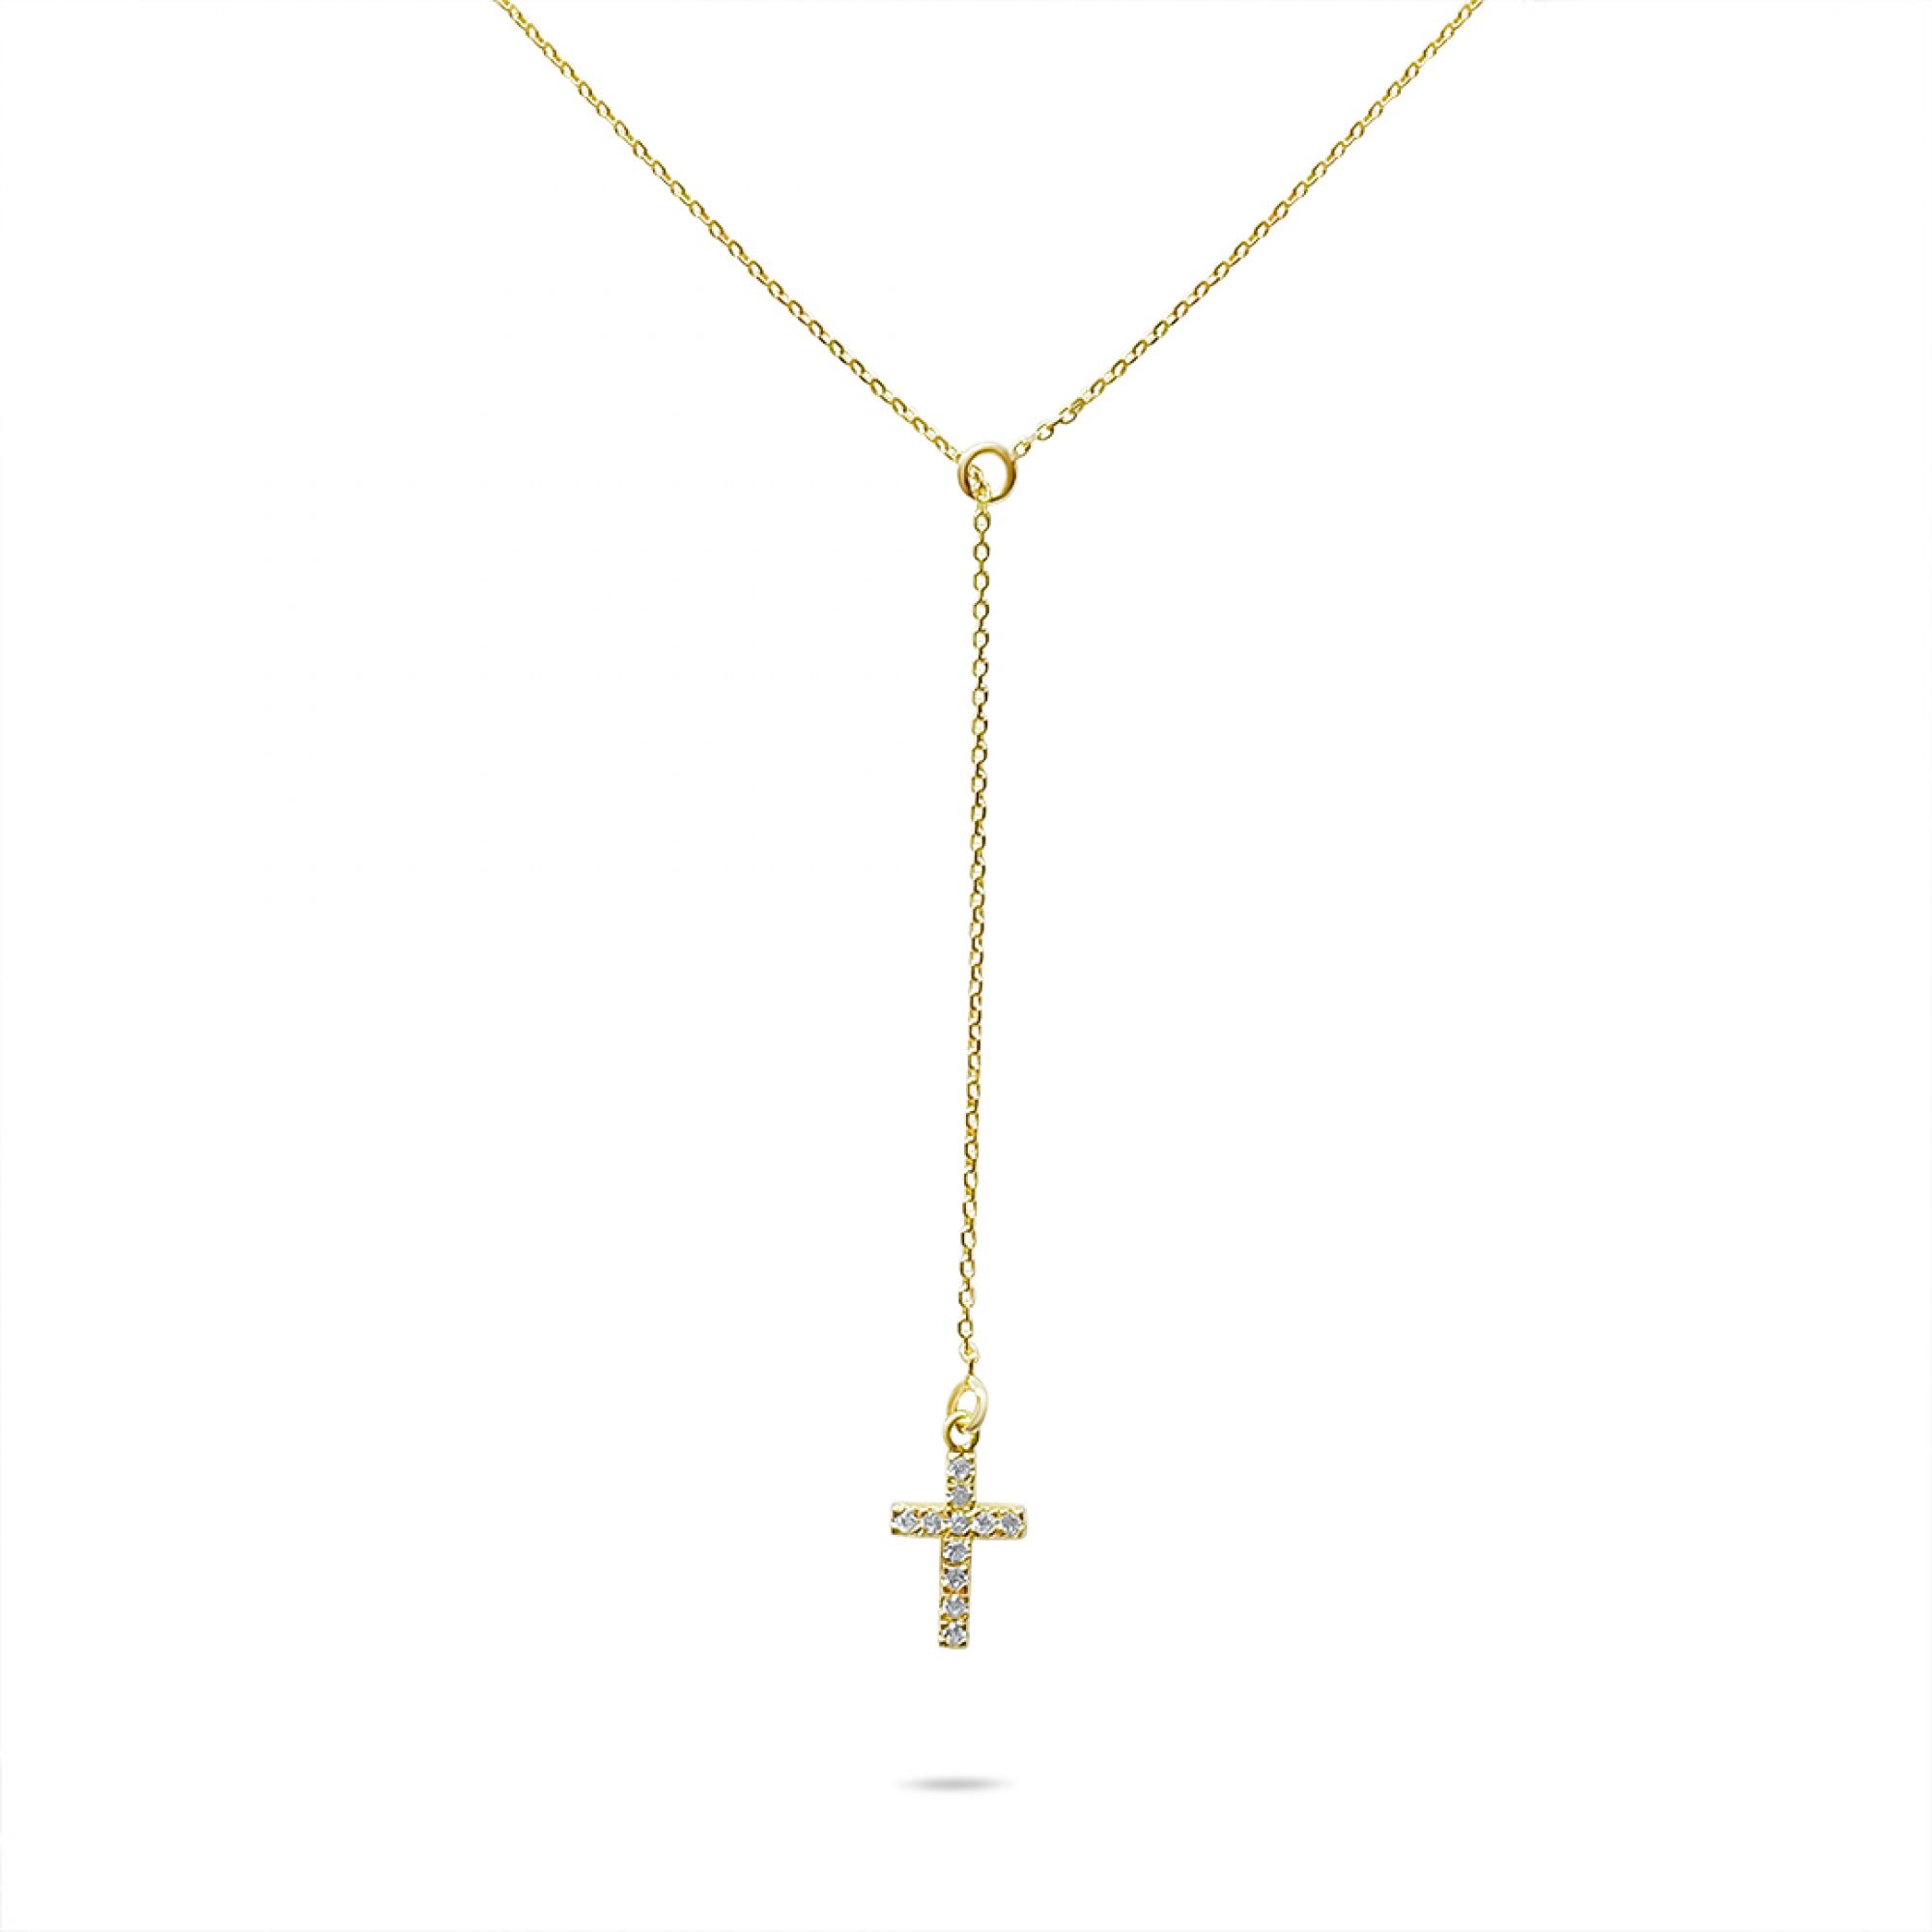 Y-style gold plated cross necklace with zircon stones